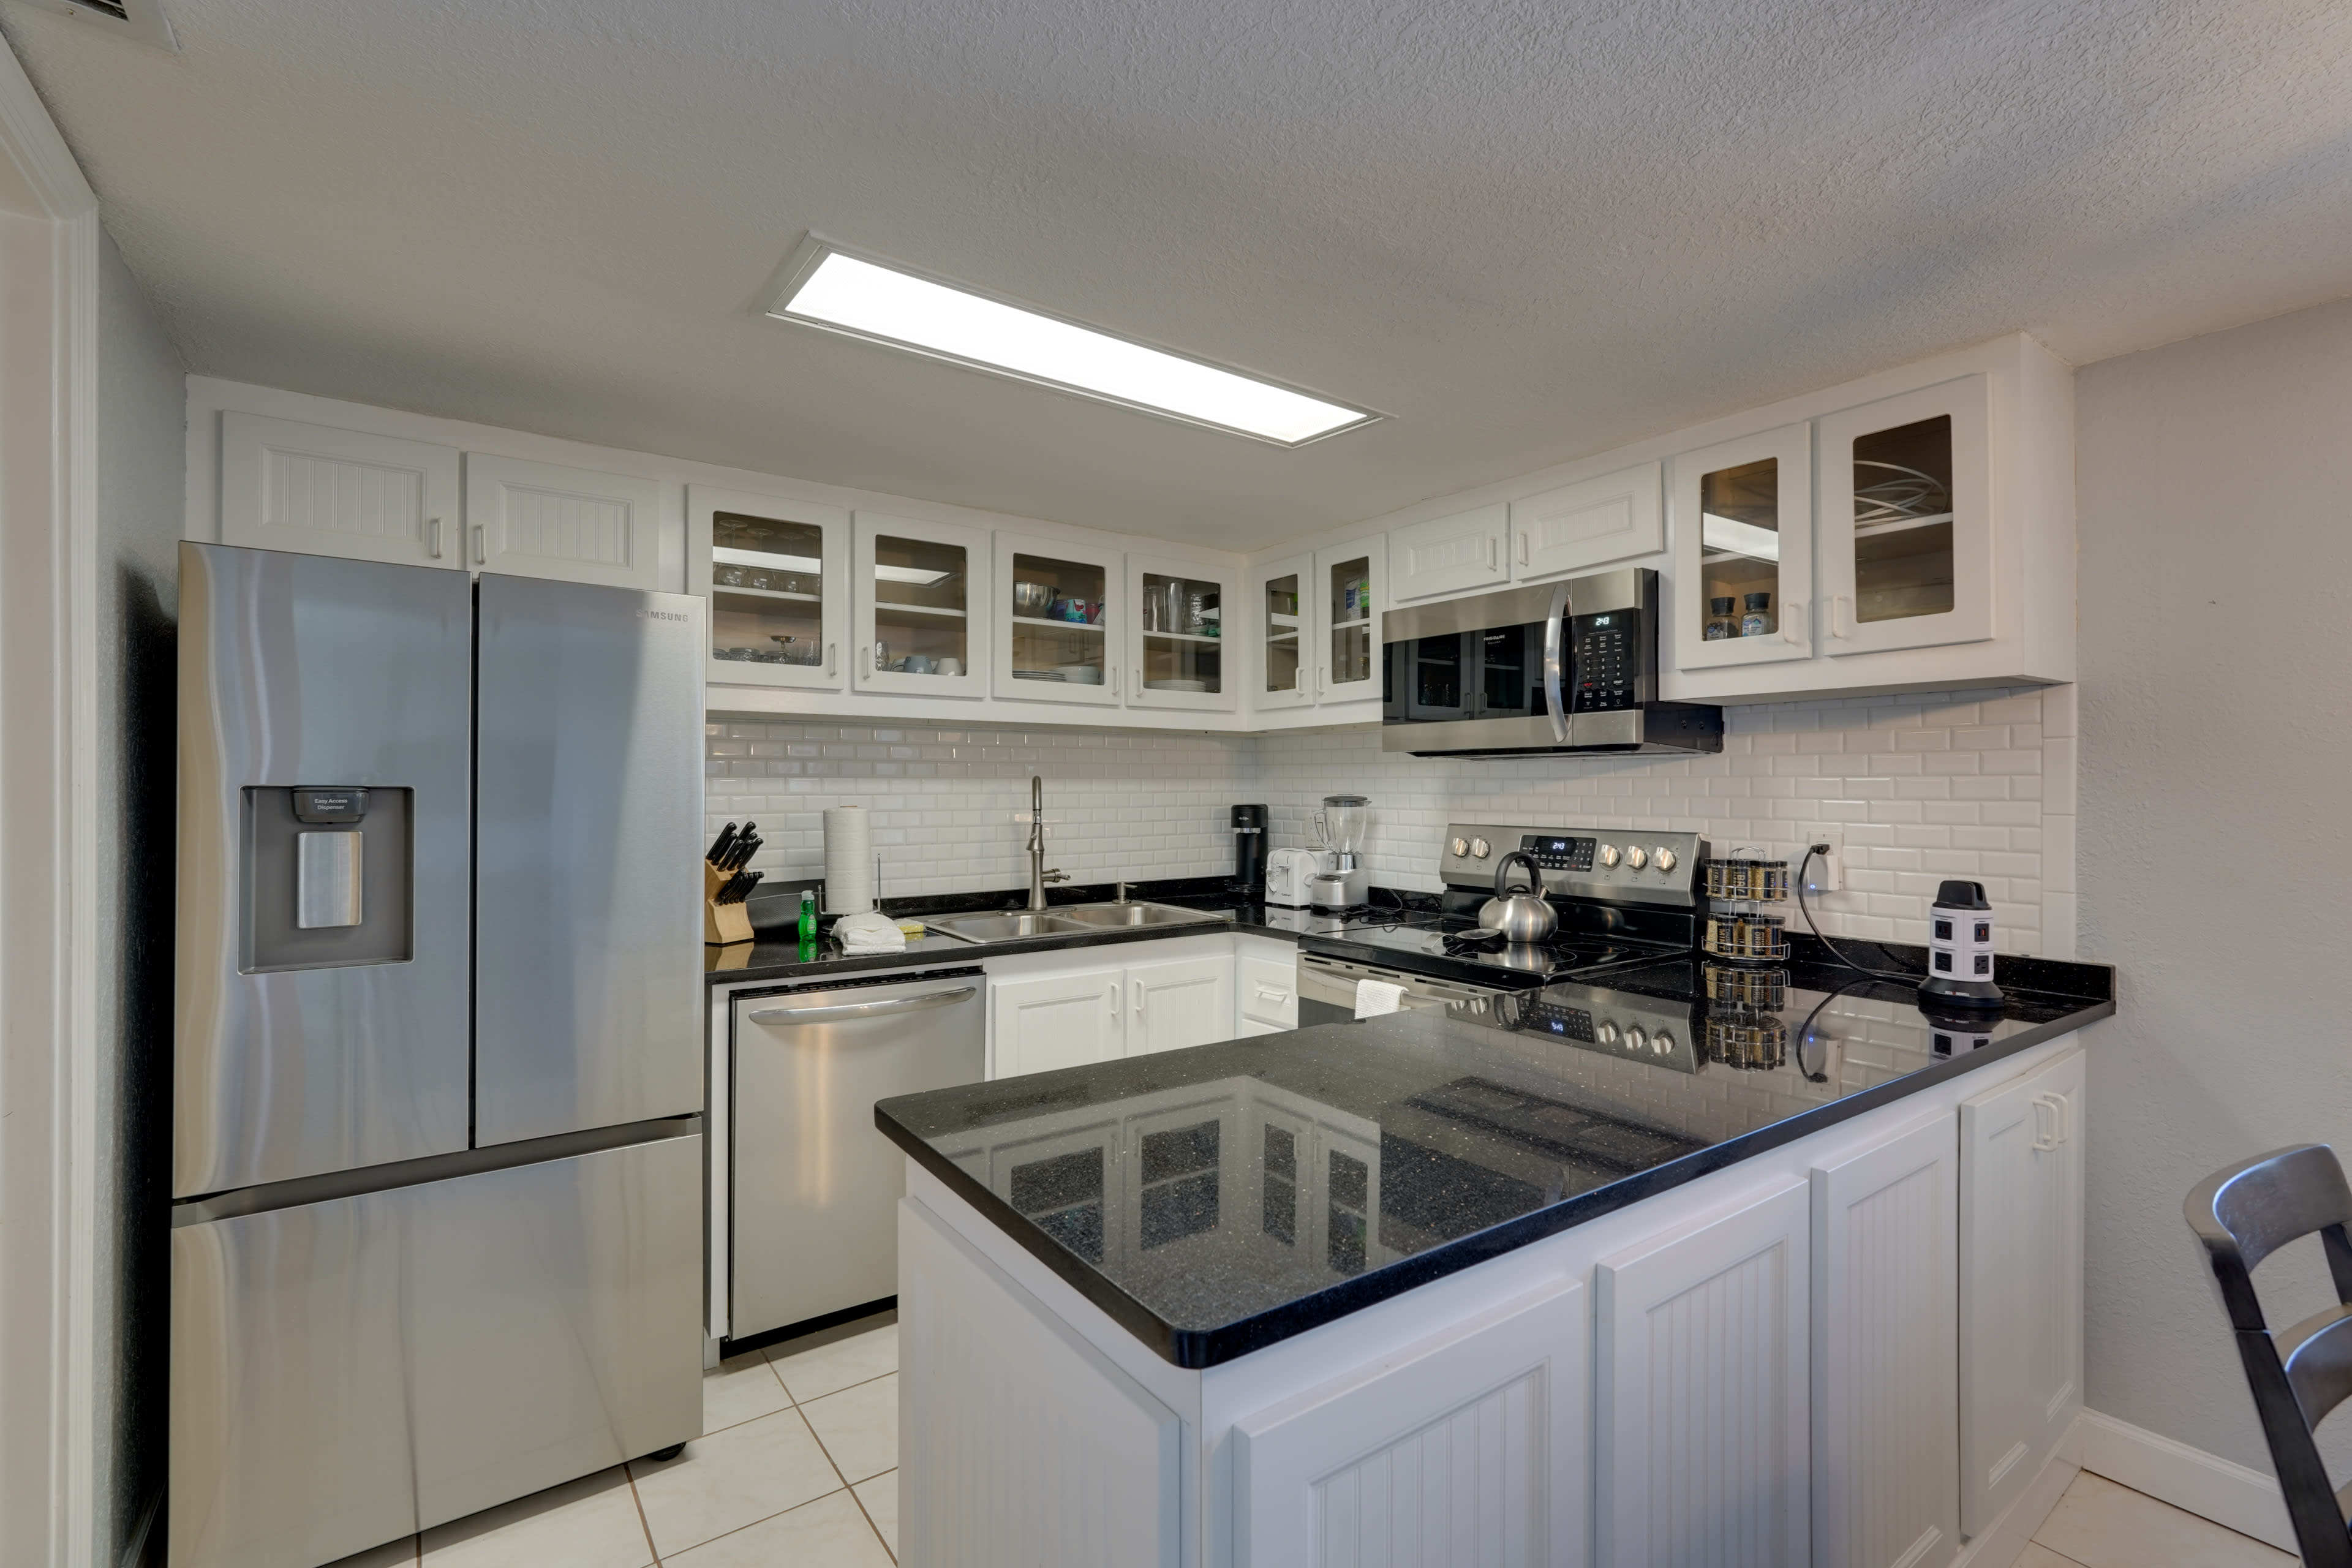 Kitchen | Fully Equipped | Cooking Basics | Coffee Maker